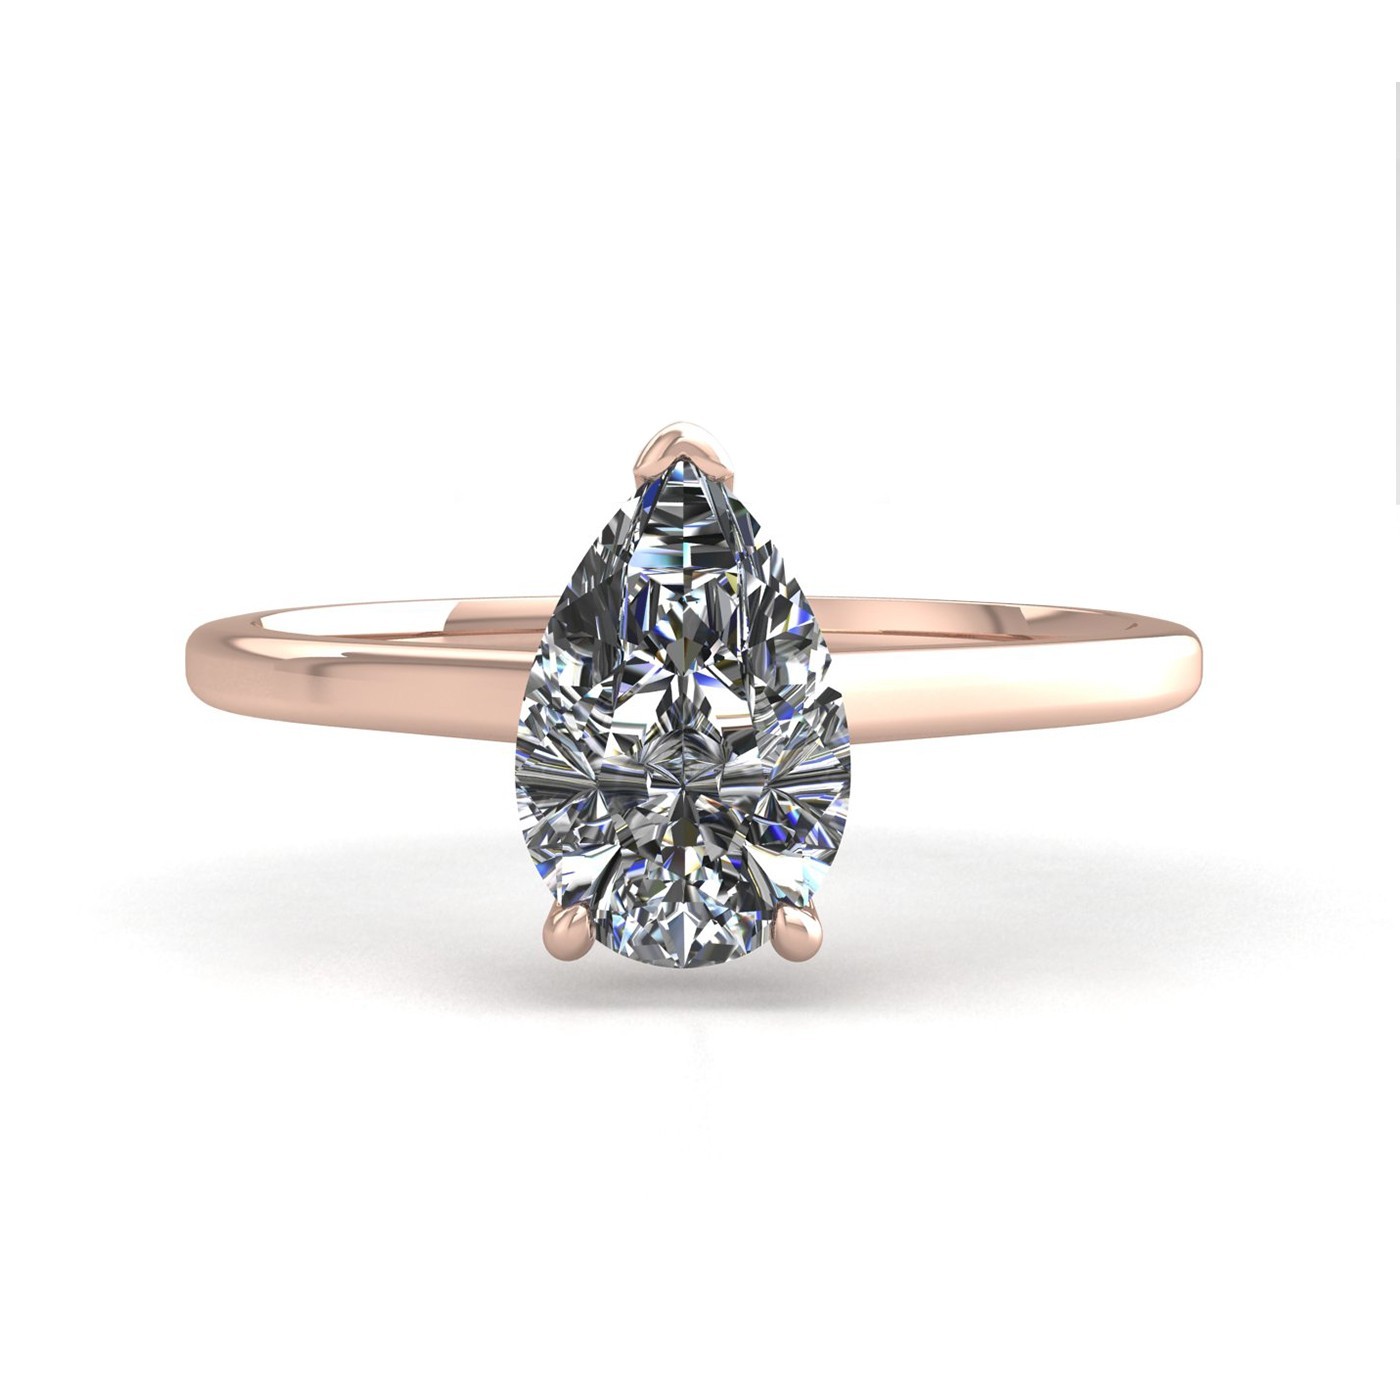 18k rose gold  0,30 ct 3 prongs solitaire pear cut diamond engagement ring with whisper thin band Photos & images